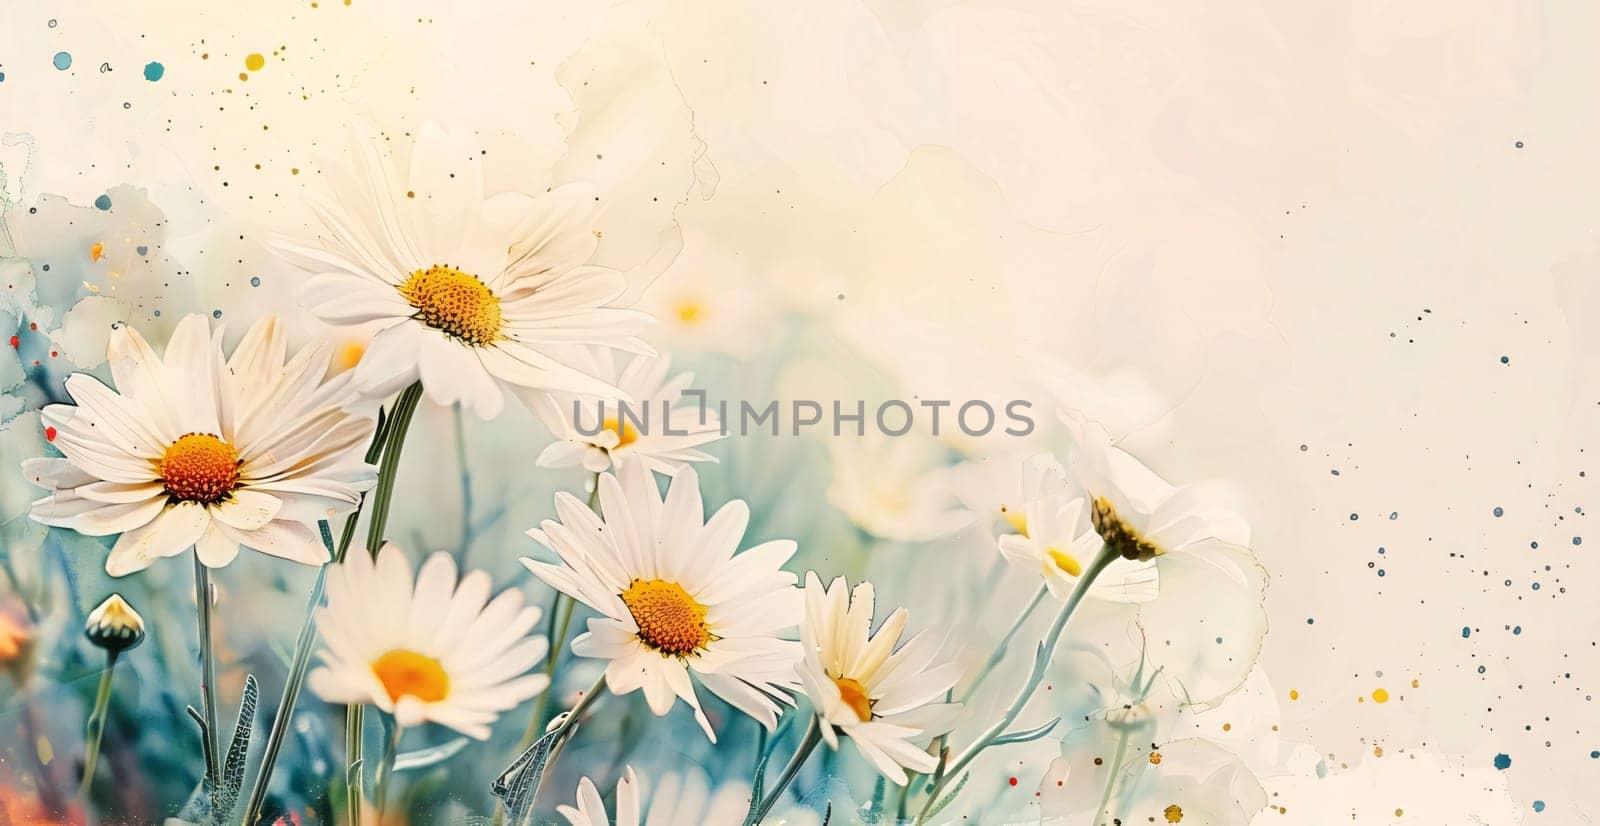 Bright banner with white daisies space for your own content. Flowering flowers, a symbol of spring, new life. A joyful time of nature waking up to life.